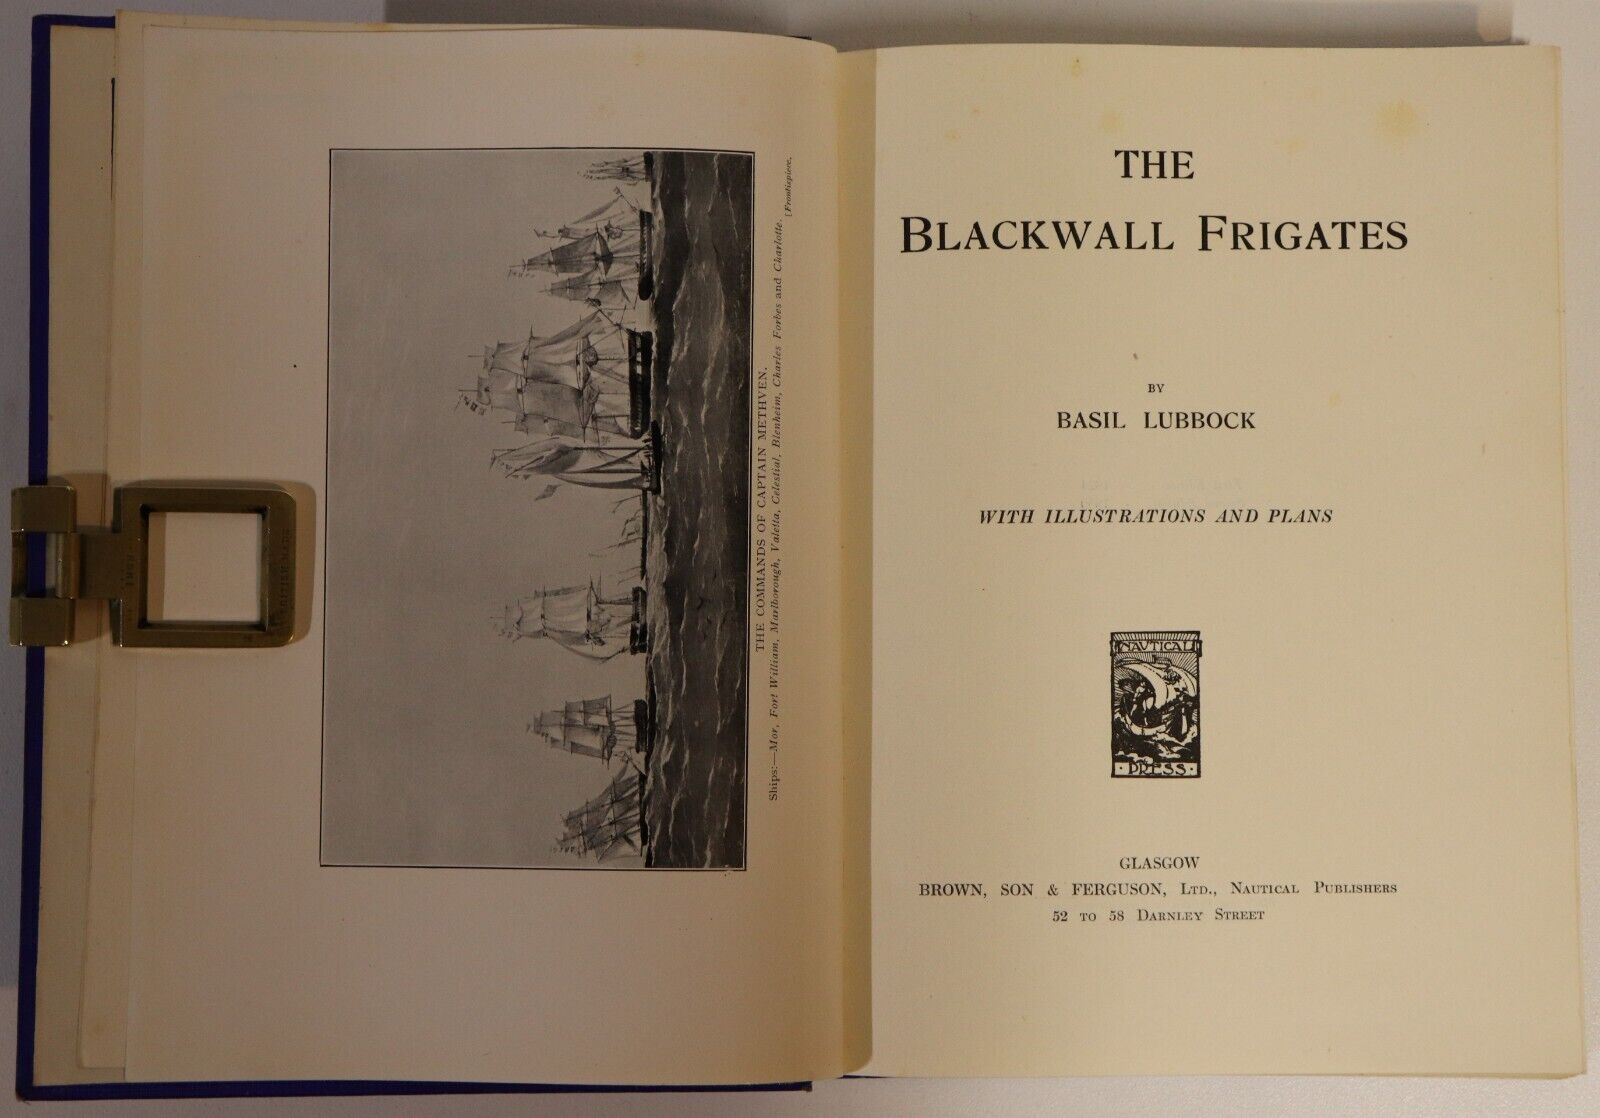 The Blackwall Frigates by Basil Lubbock - 1950 - Maritime History Book - 0